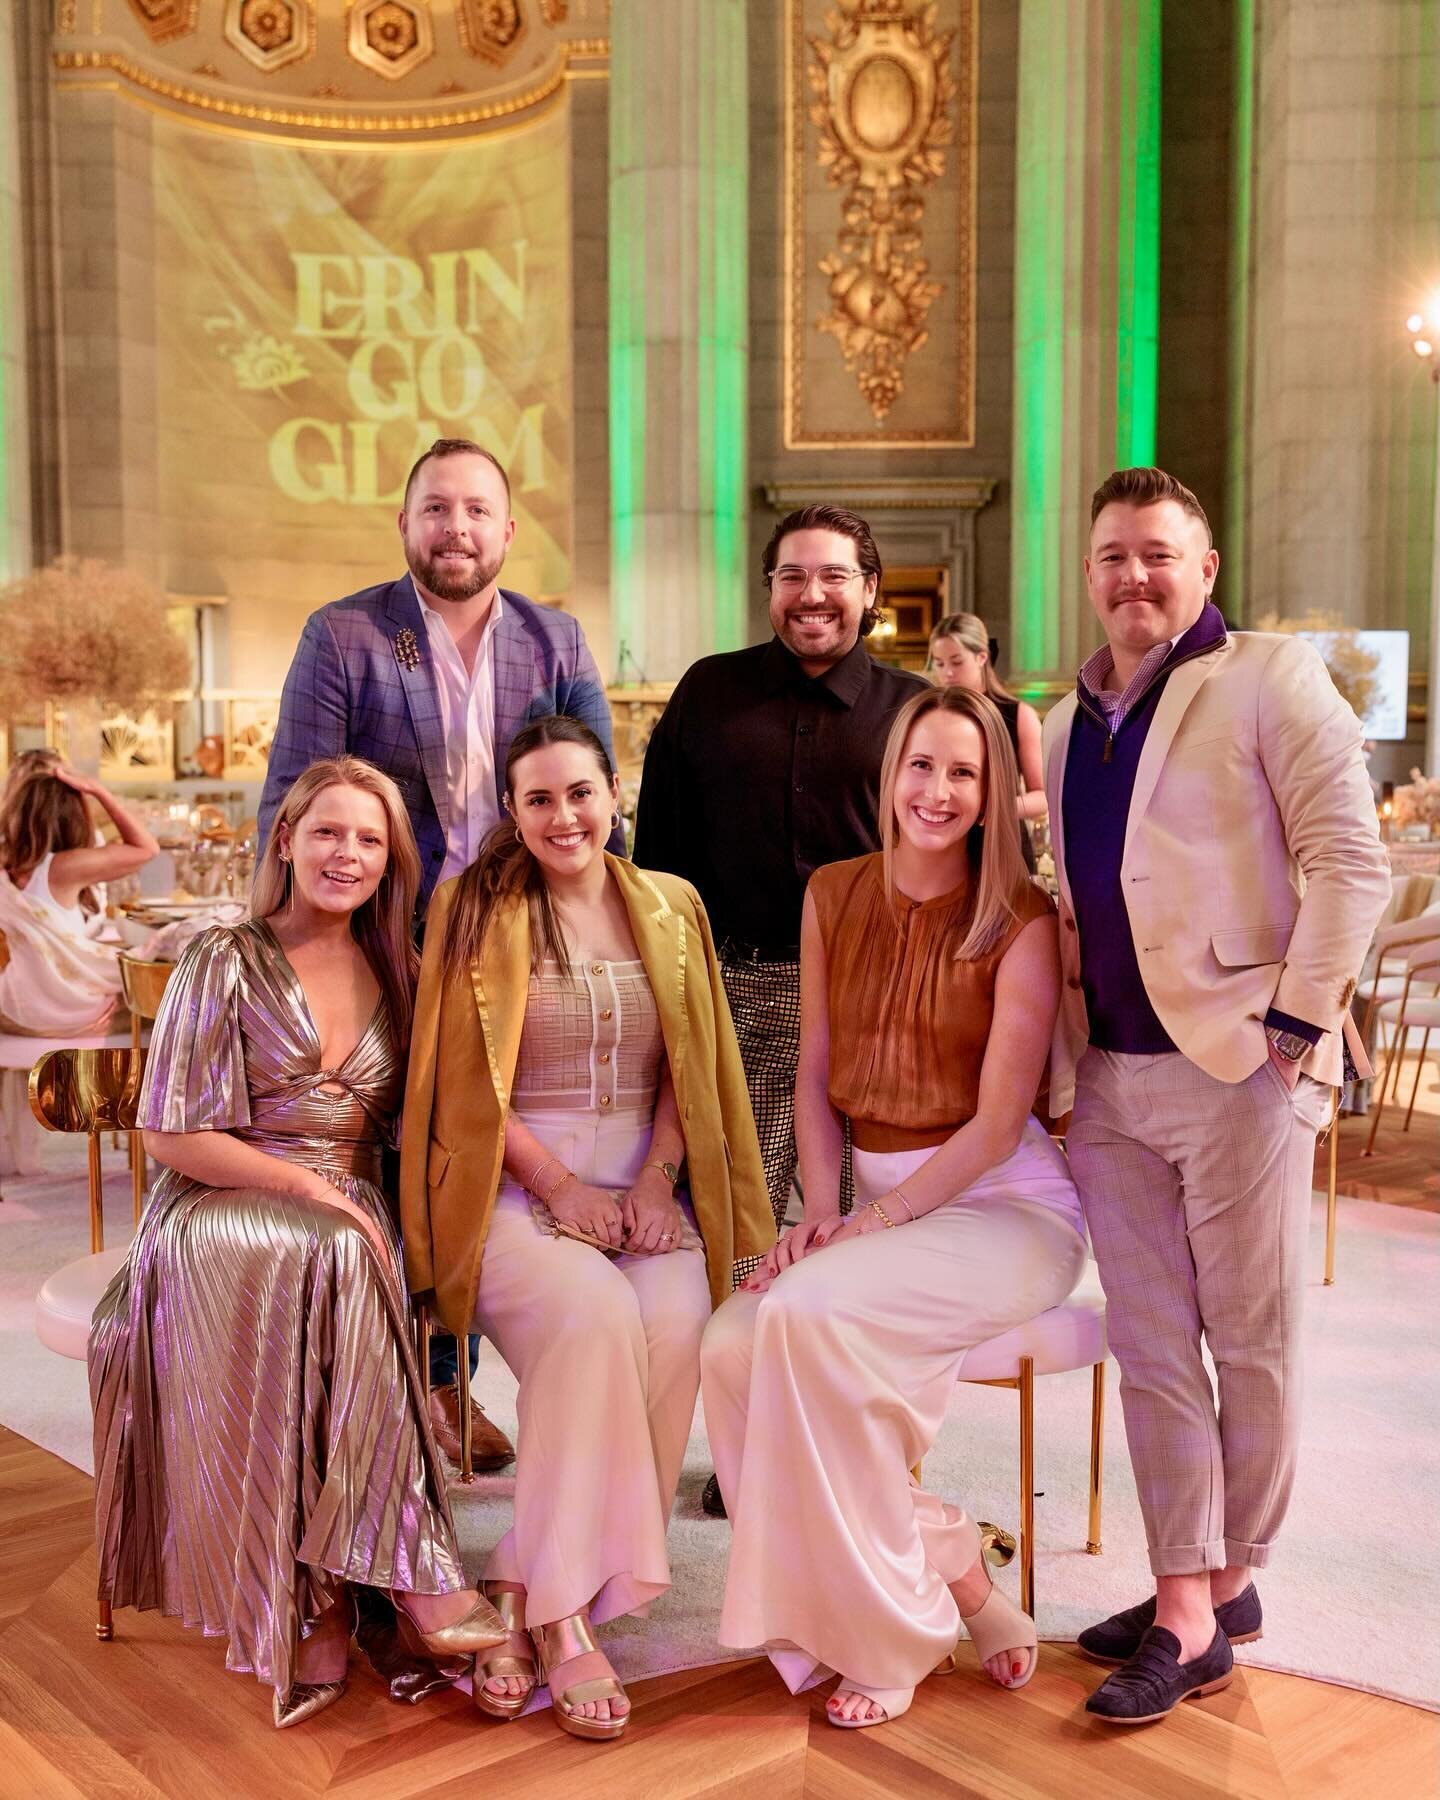 Last week, team Stratus had the privilege of attending Erin Go Glam, an annual event hosted by Susan Lacz, Principal &amp; CEO of Ridgewells Catering. This year&rsquo;s event was held at the newly renovated, iconic Andrew W. Mellon Auditorium. Every 